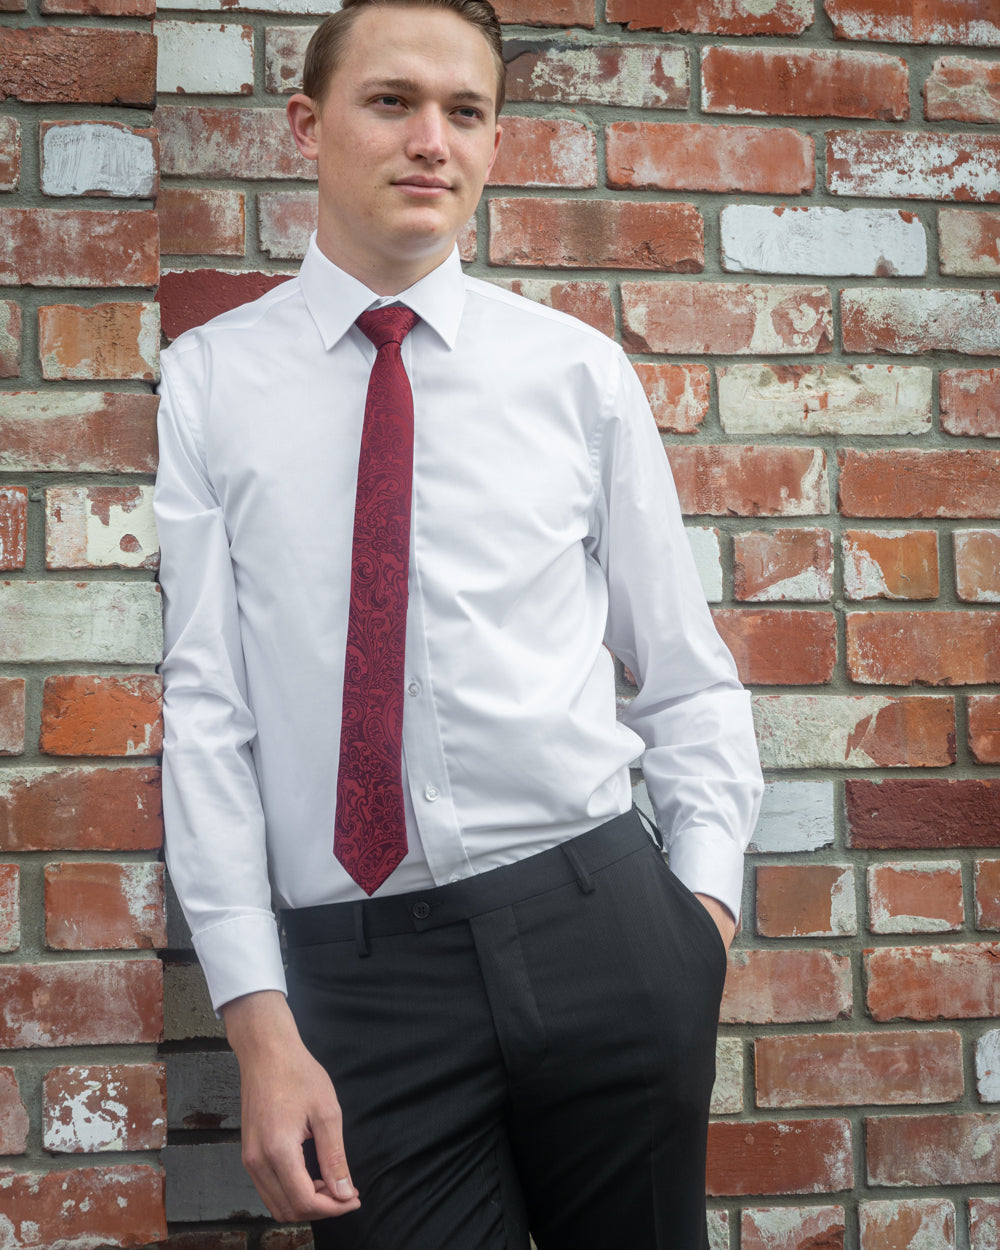 A Plain Collar Slim-fit white shirt made from a soft easy care fabric -and featuring a placket front a plain cuff, a darted back and a back yoke with double french cuffs